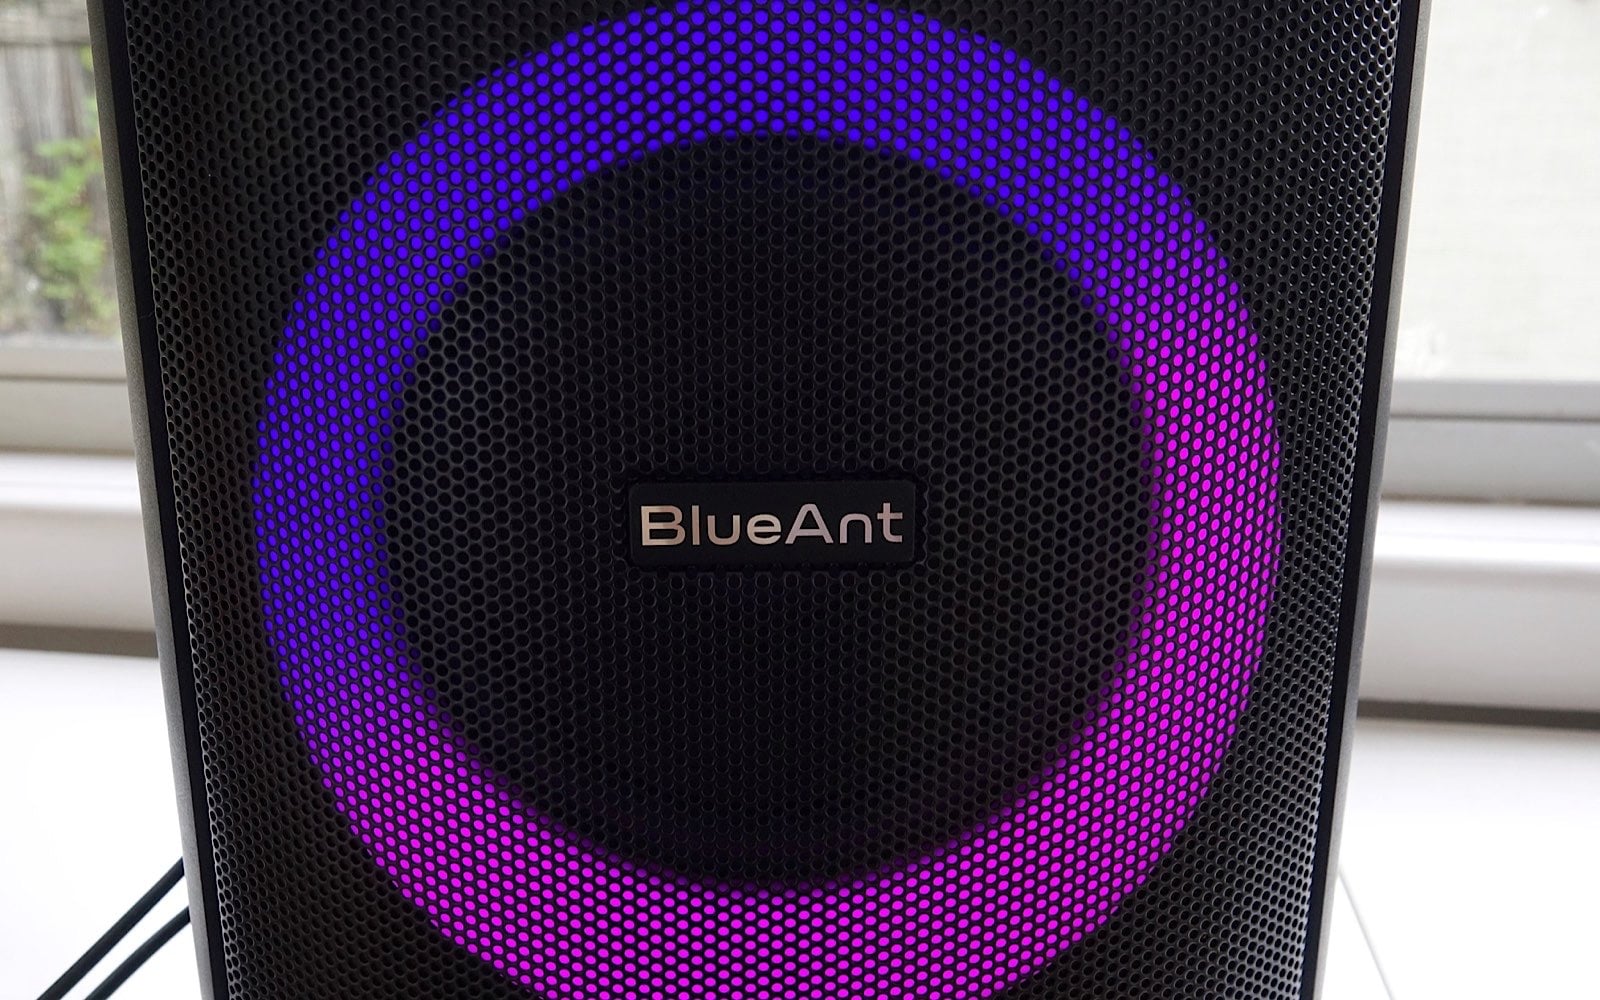 BlueAnt X5 reviewed